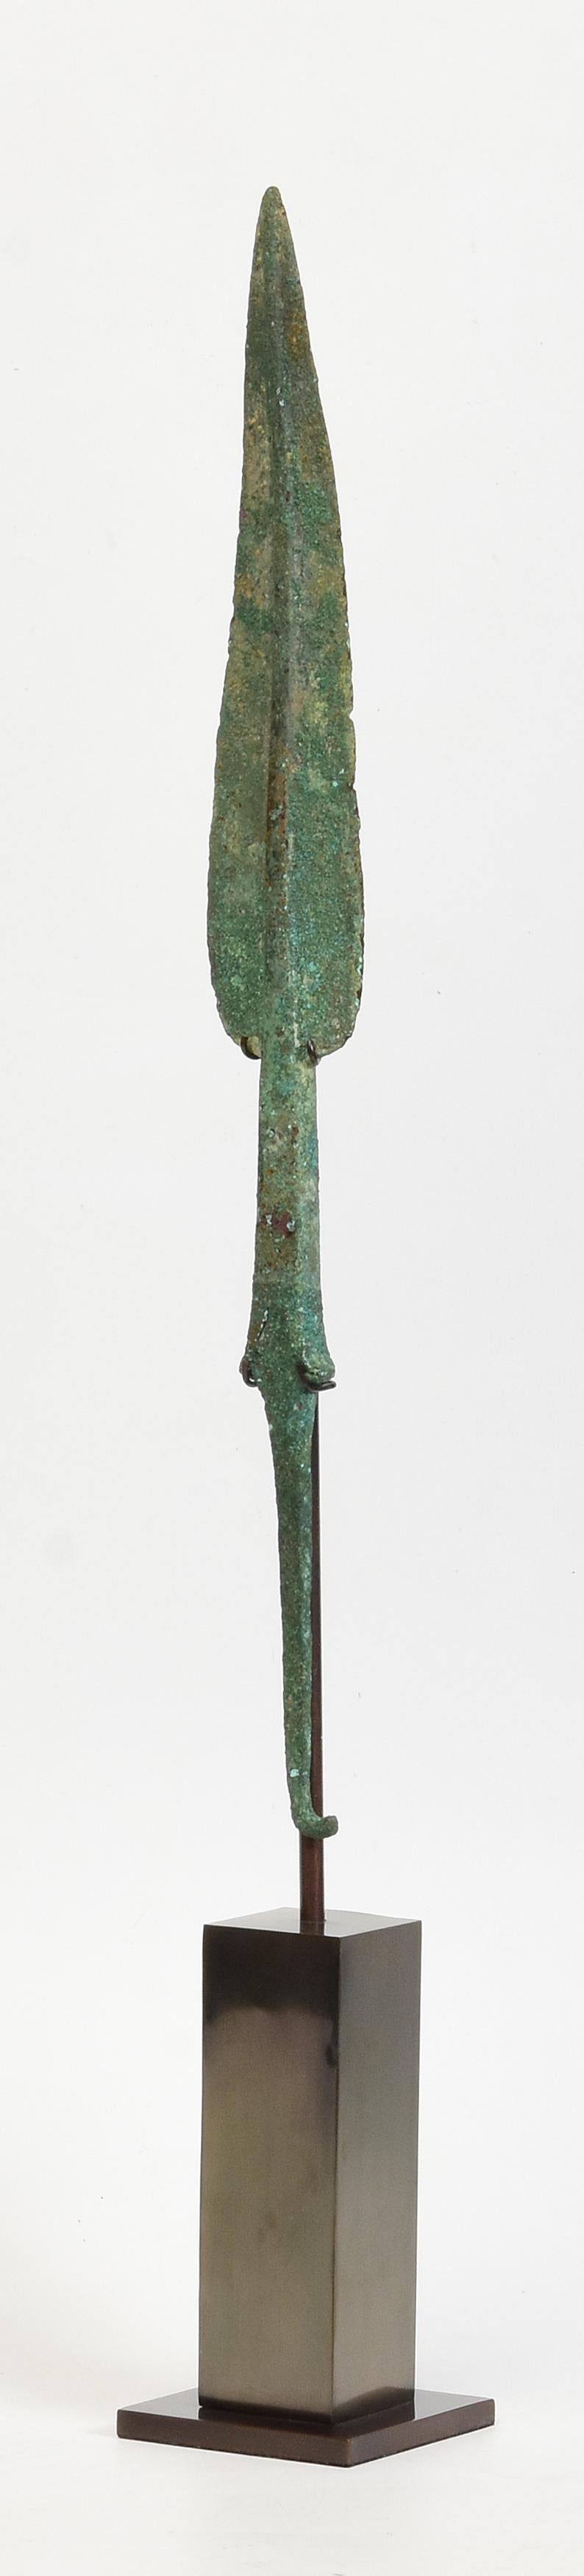 Metalwork Ancient Antique Luristan Bronze Spear Early Iron Age Weapon For Sale